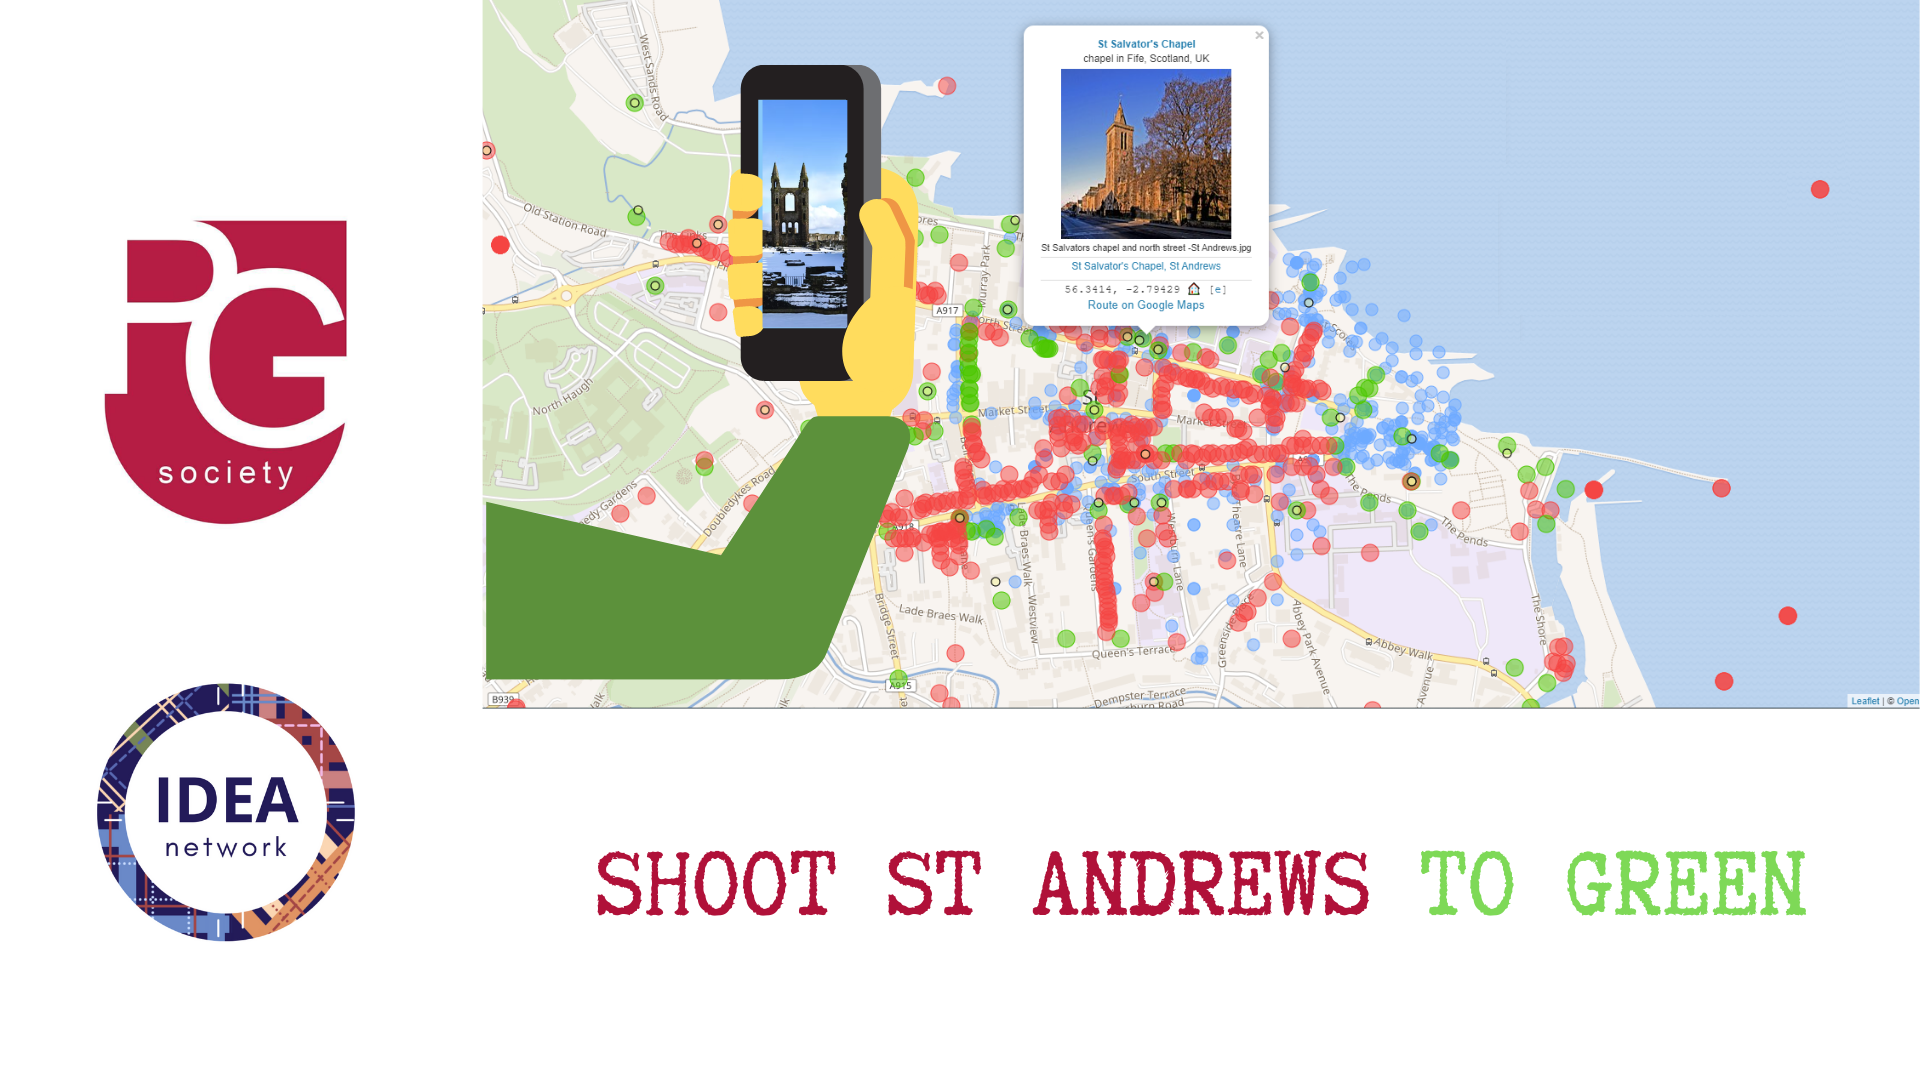 A map shows missing images from the OpenStreetMap for St Andrews